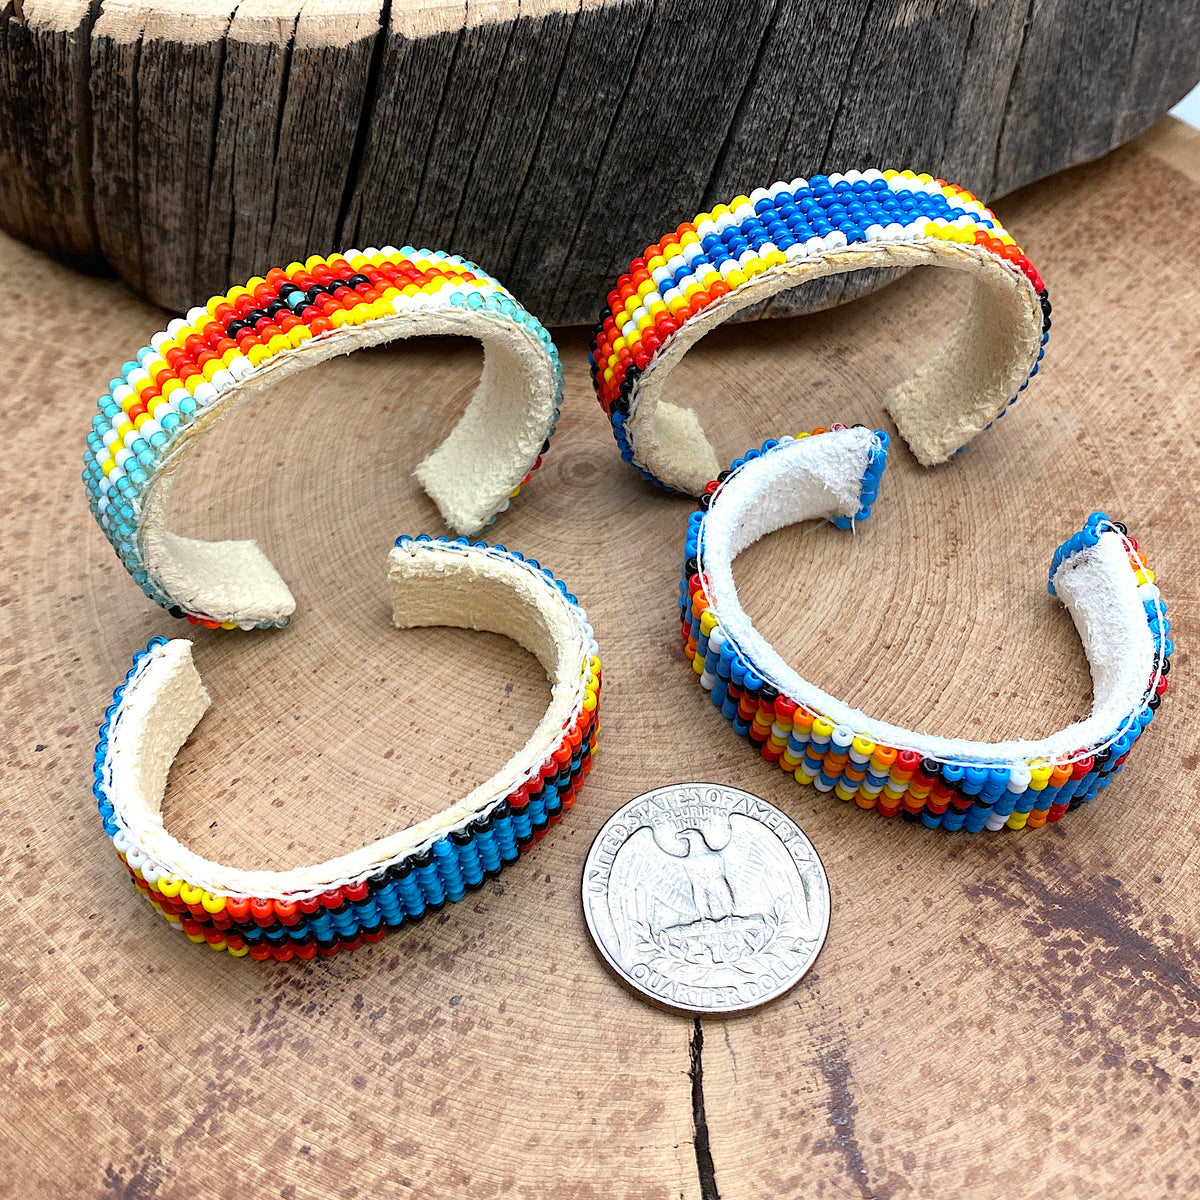 Comparison shot of a US quarter coin and Beaded baby bracelets of various patterns and colors laid together